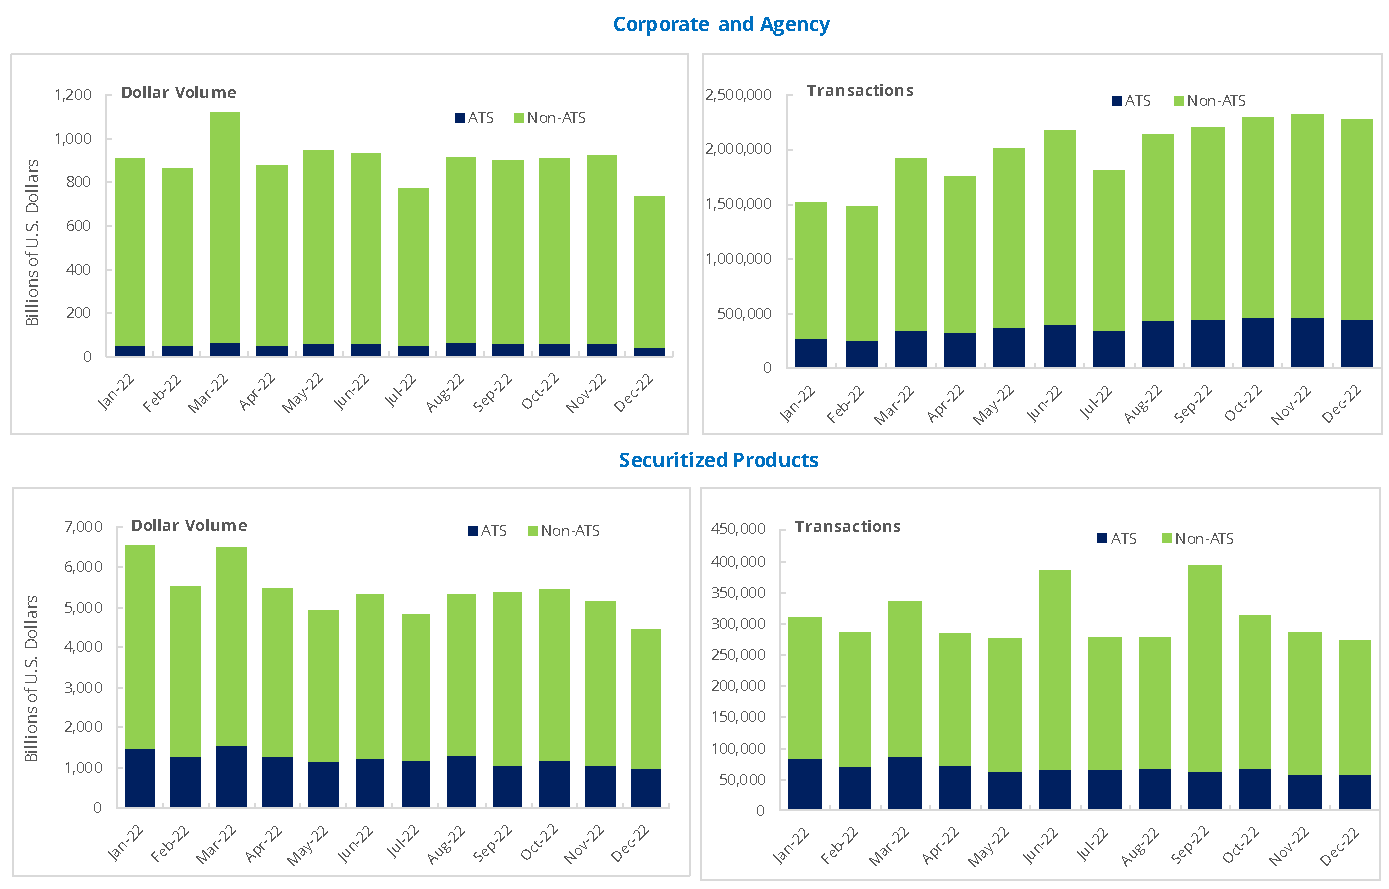 Monthly TRACE Reported Fixed Income Activity By Product Type and Venue Type